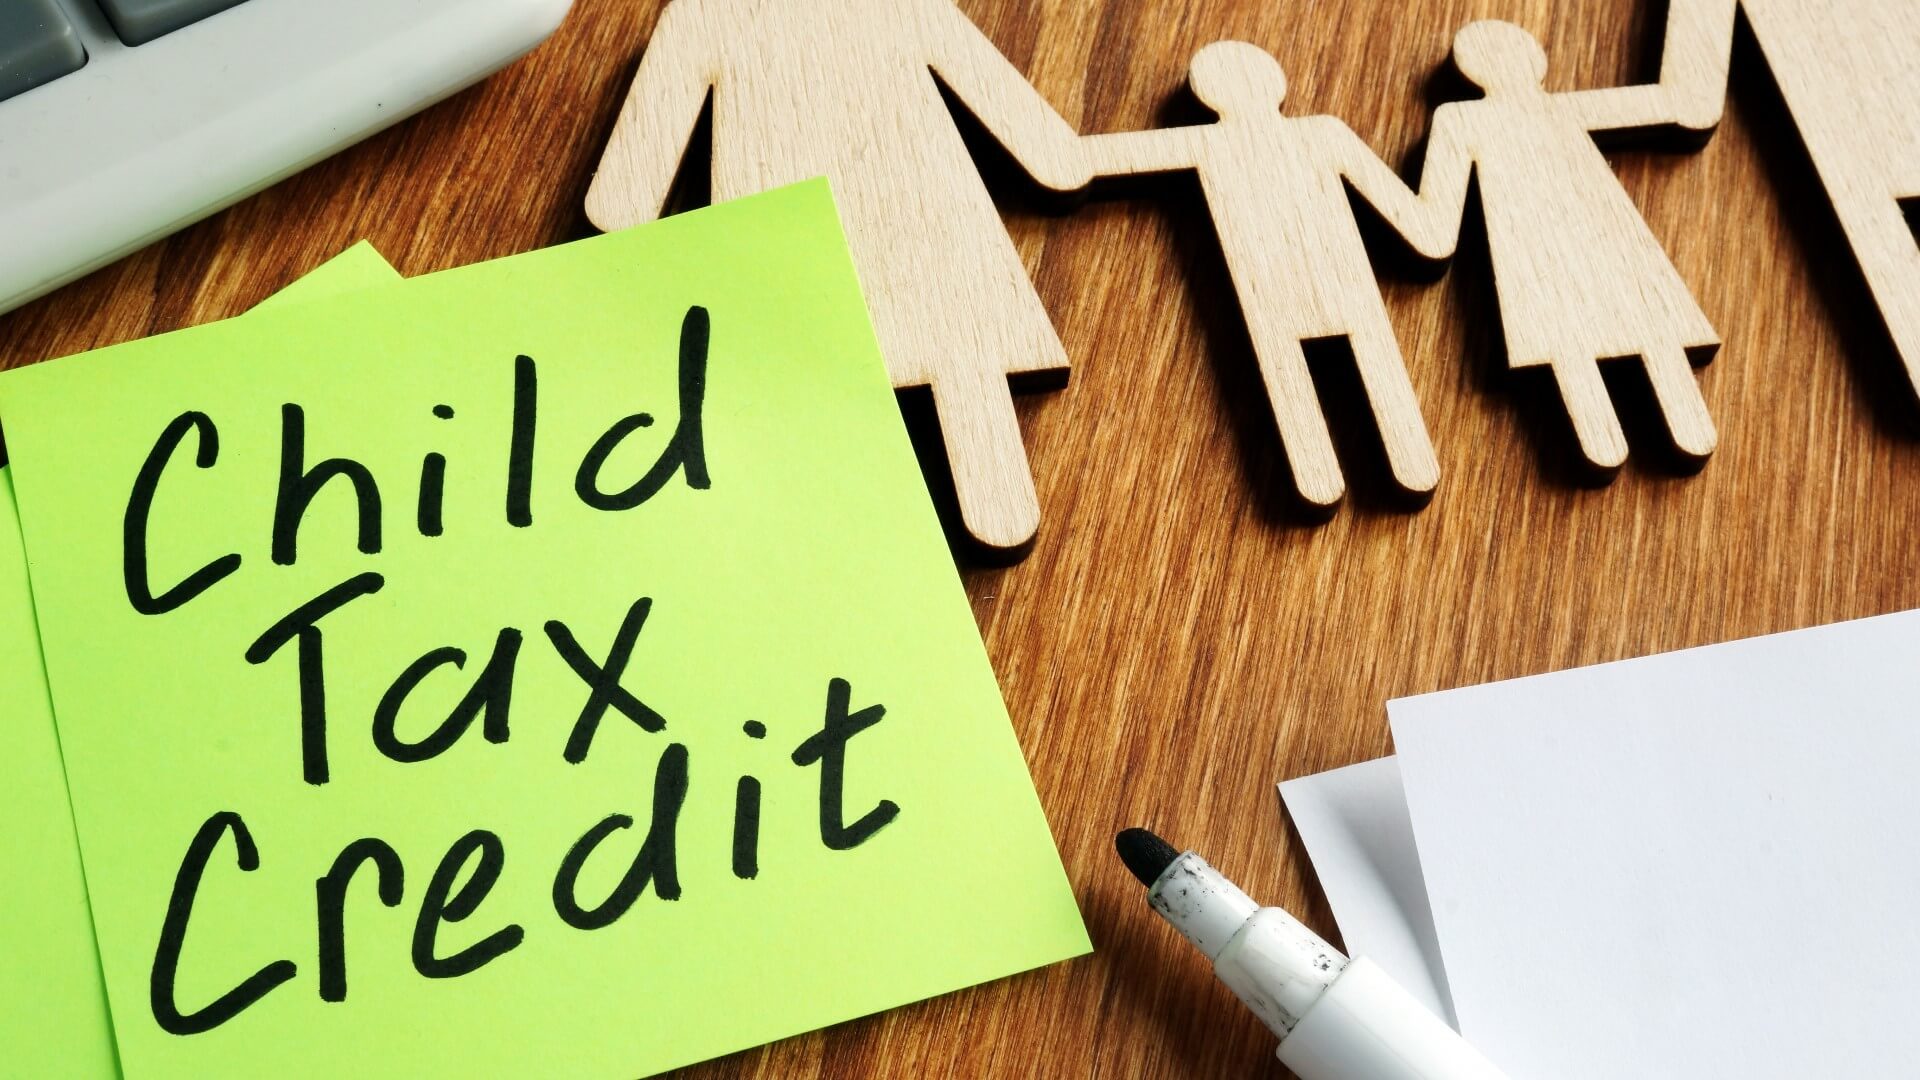 What’s Child Tax Credit?